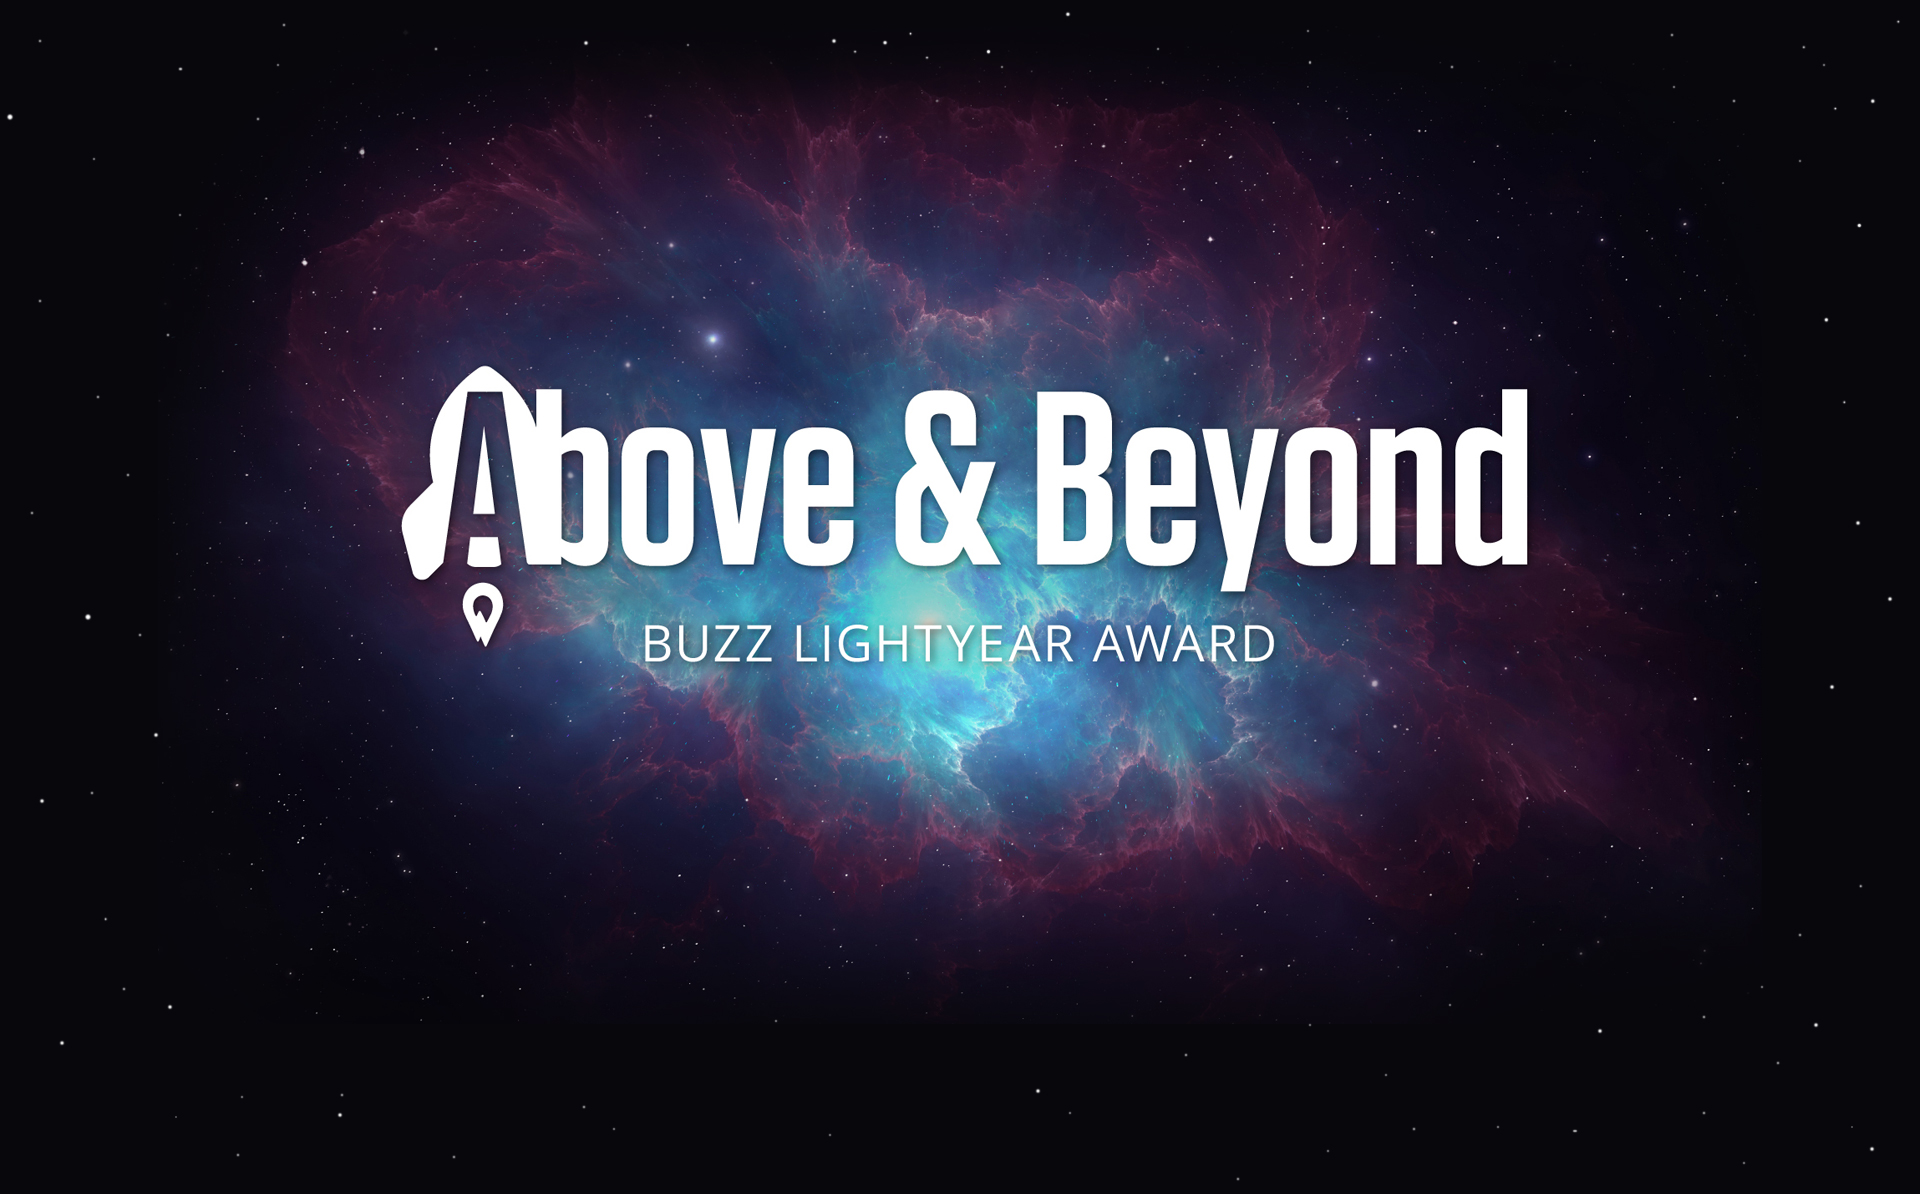 Above & Beyond Text over a starry space sky